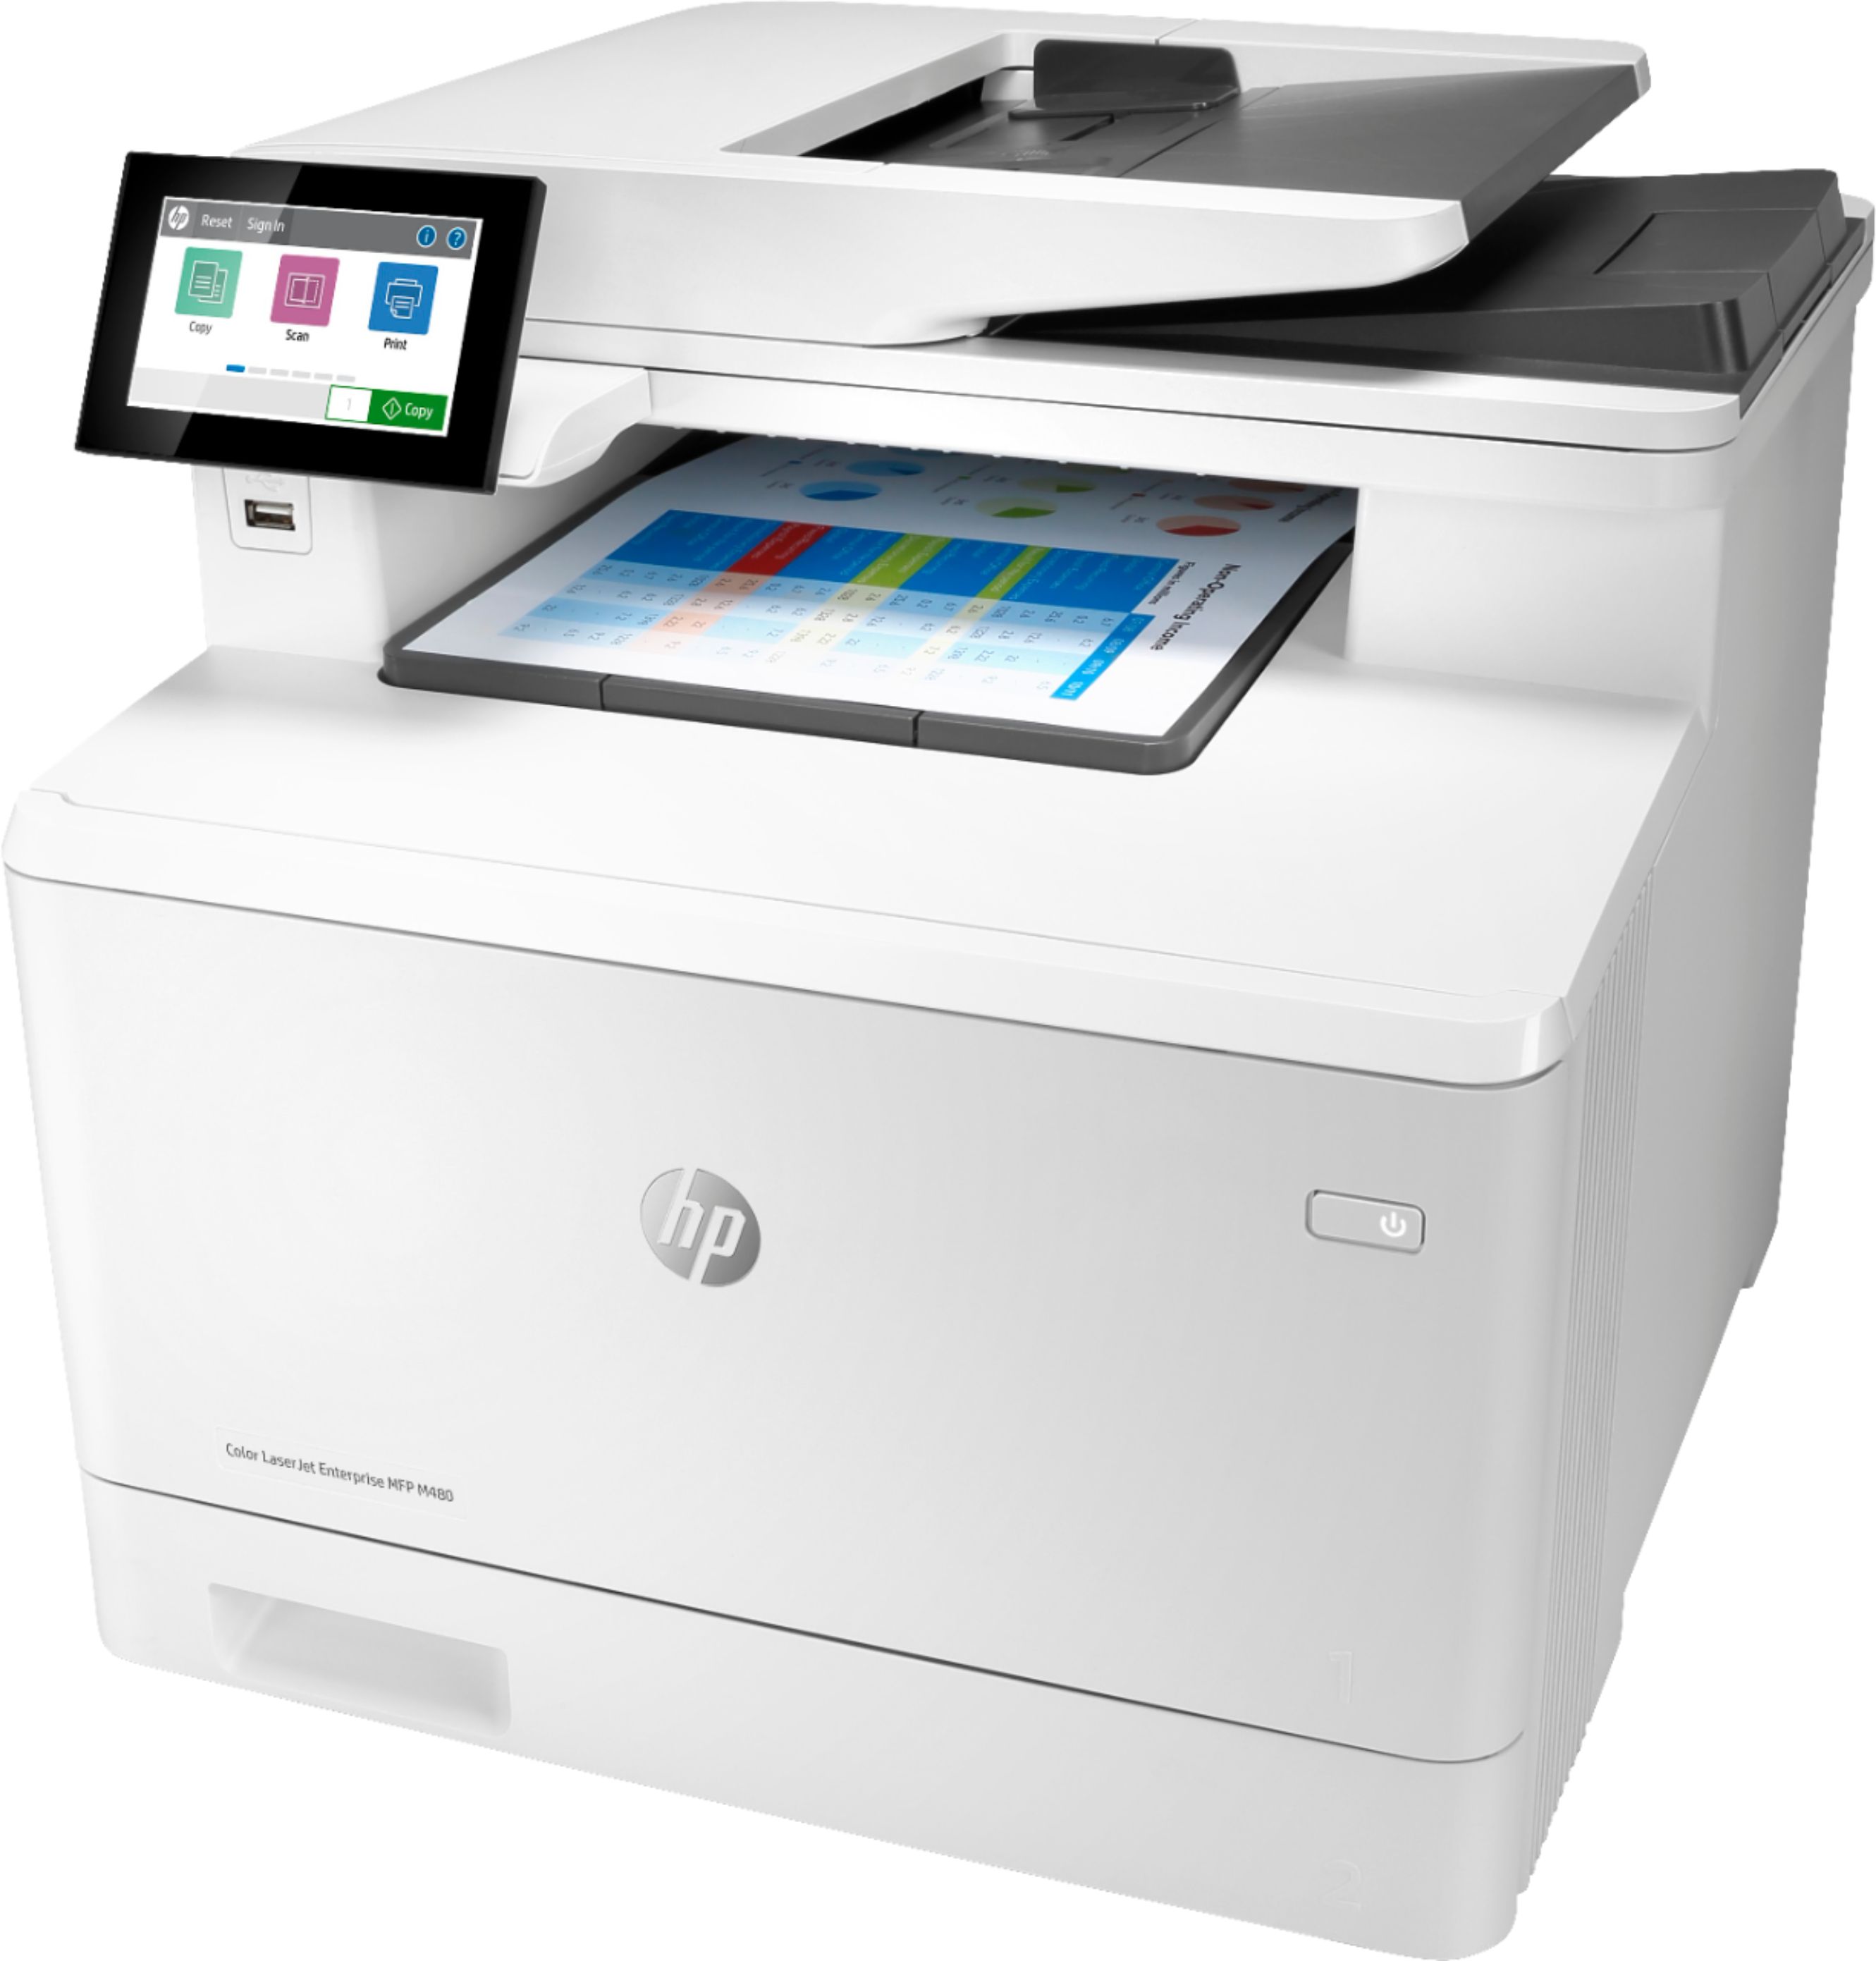 Angle View: HP - LaserJet Enterprise M480F Color All-In-One Laser Printer - White